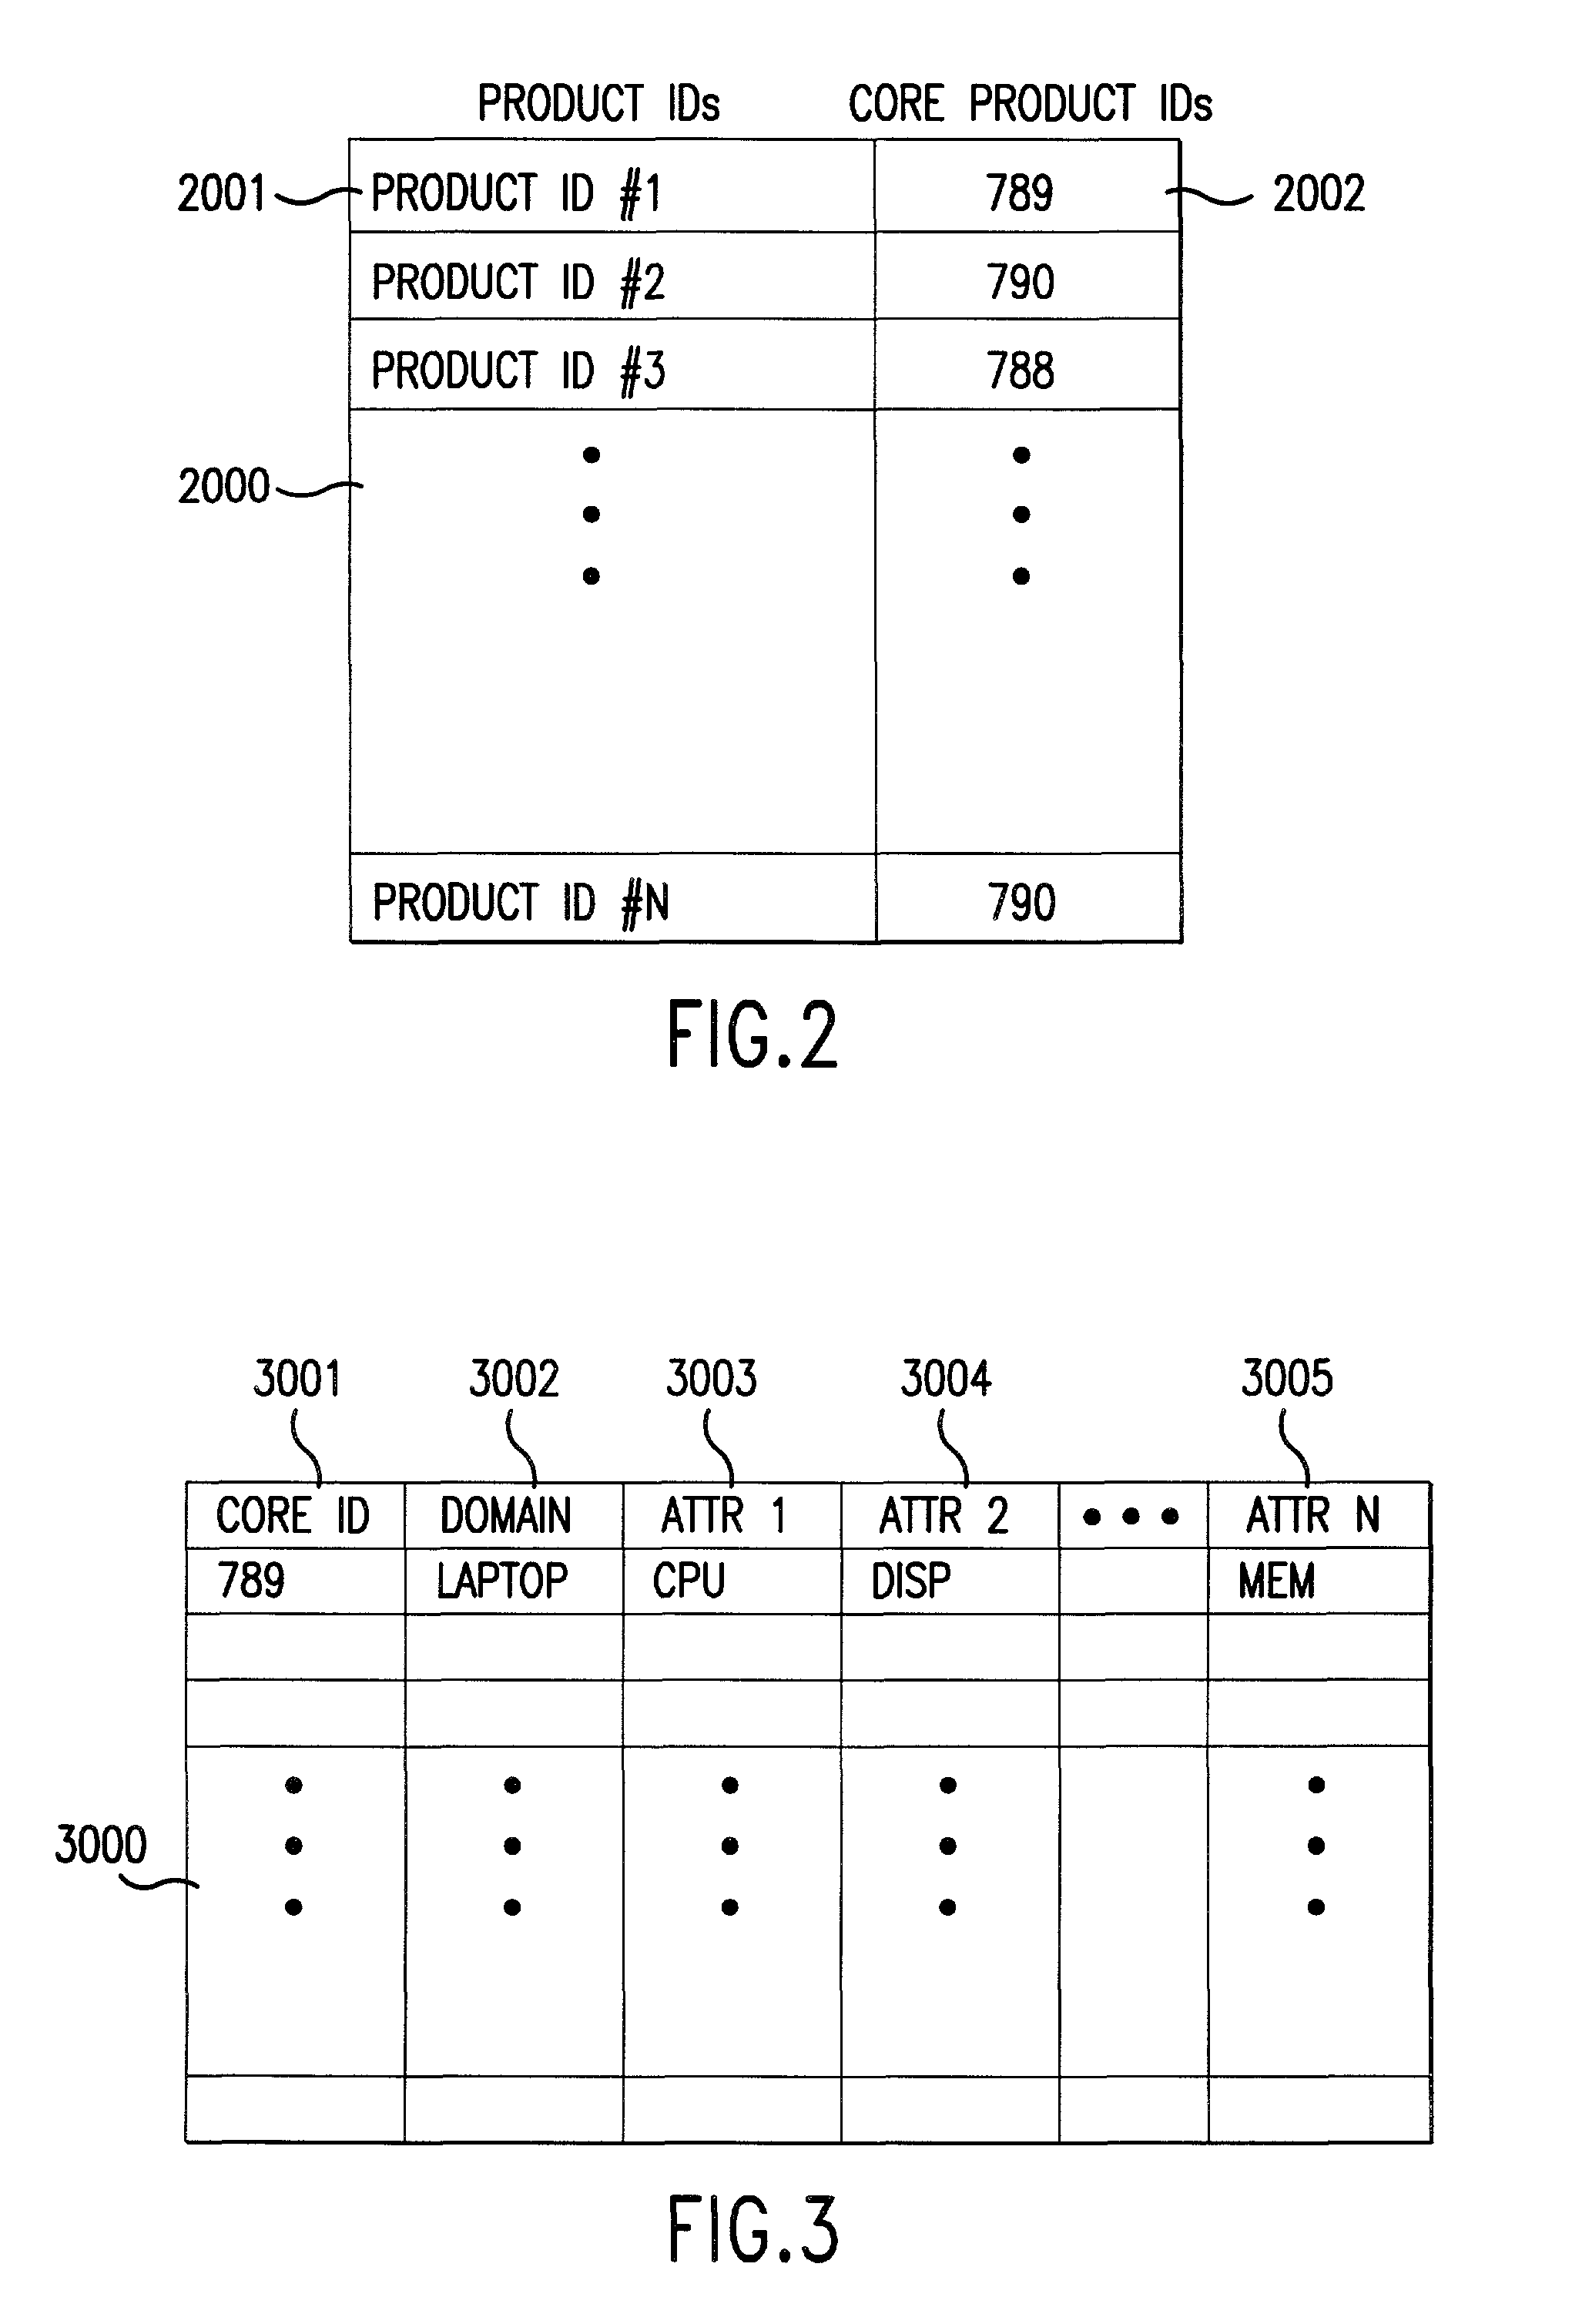 System and method for collecting, associating, normalizing and presenting product and vendor information on a distributed network